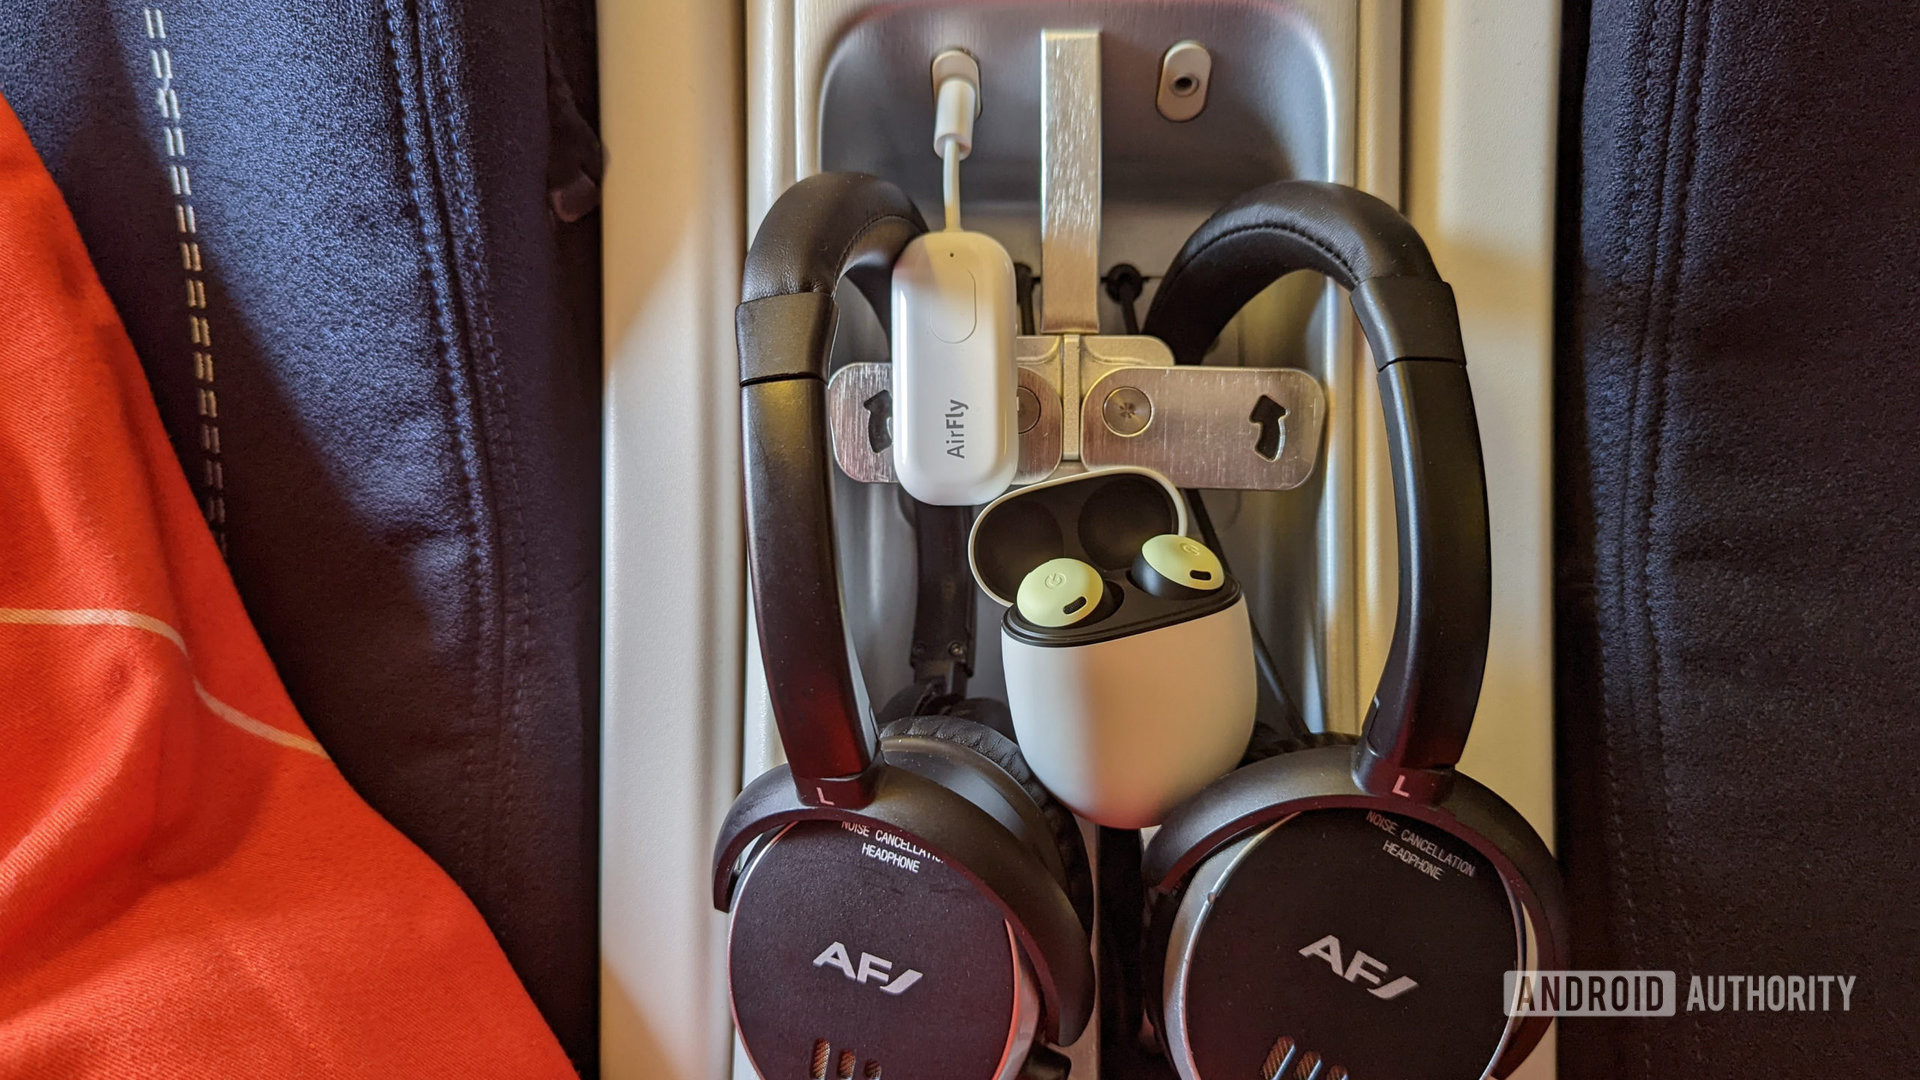 Airfly Pro connected to the passenger console of an Air France plane with Google Pixel Buds Pro and Air France headphones